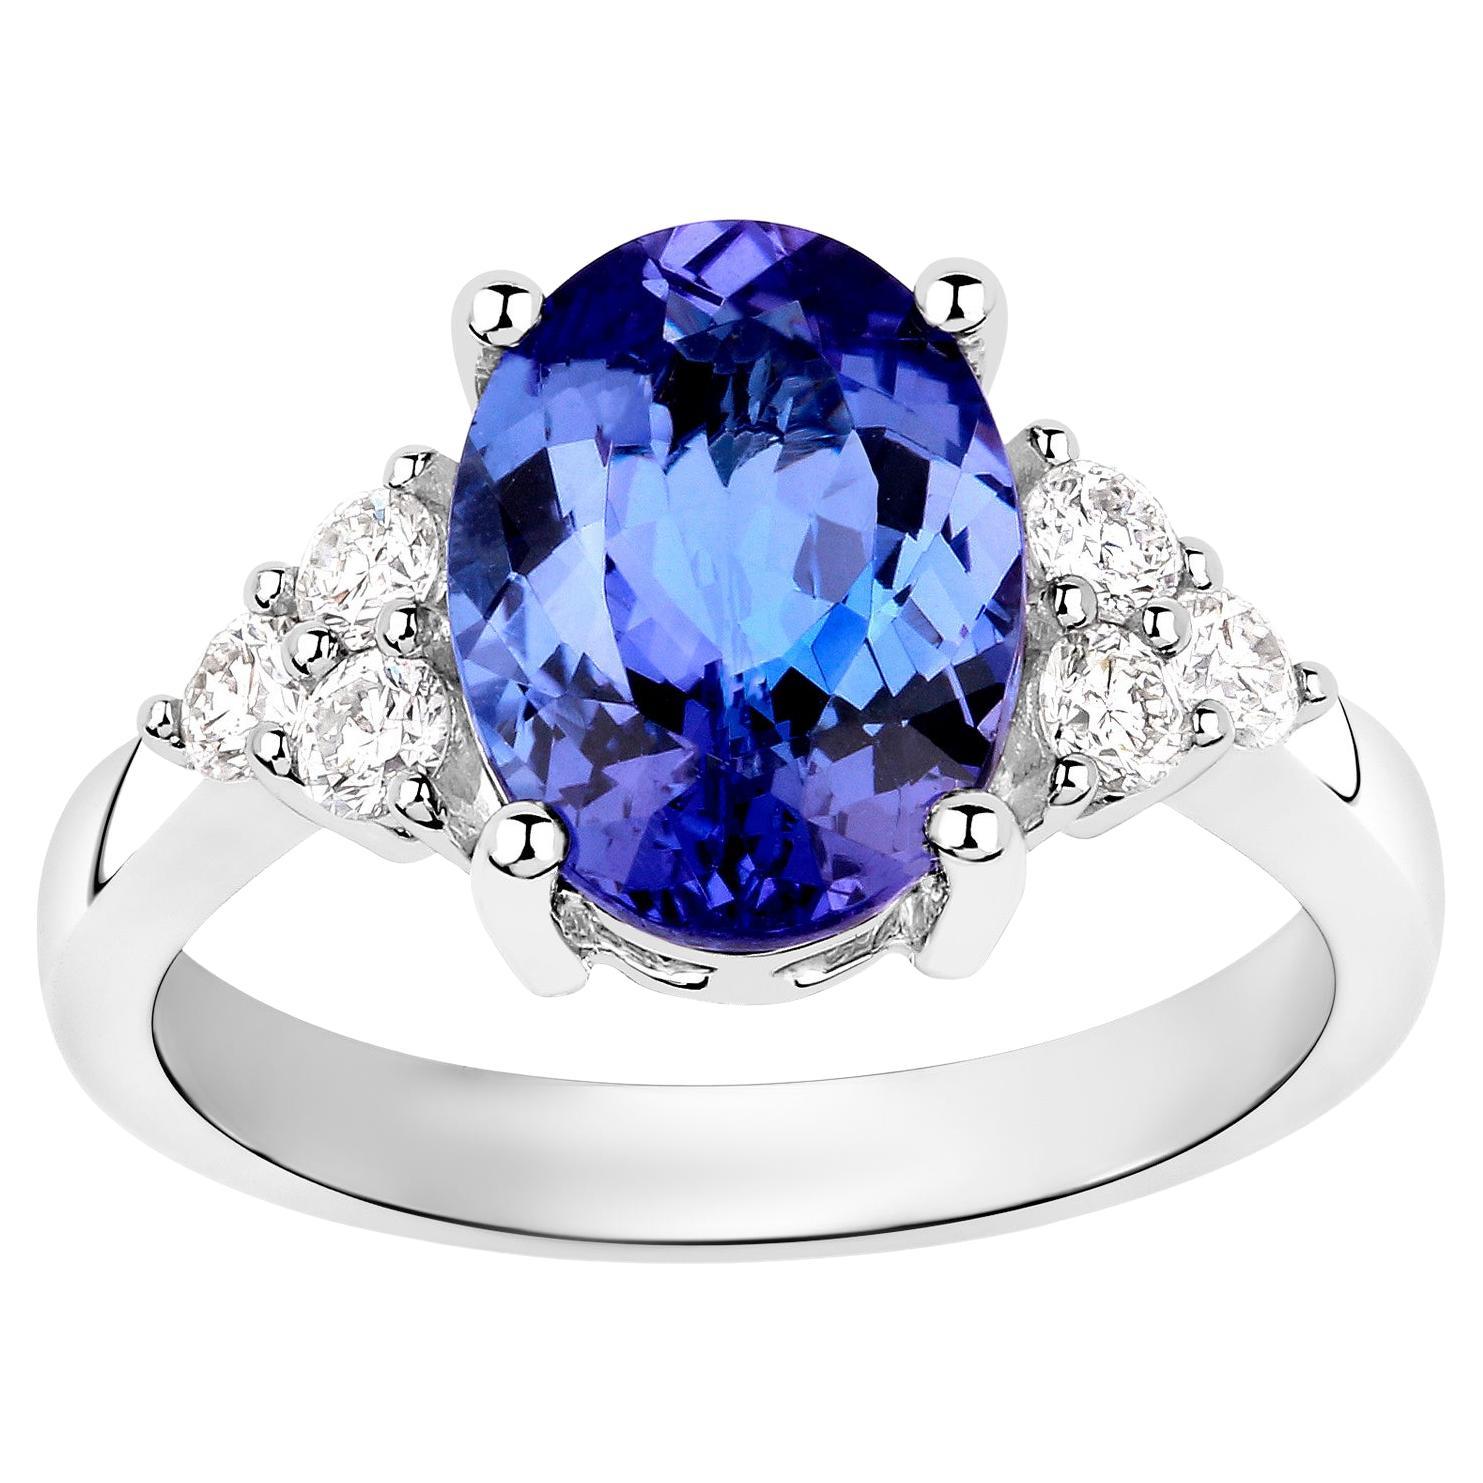 Tanzanite Solitaire Ring 3.9 Carats Diamond Setting 14K White Gold For Sale